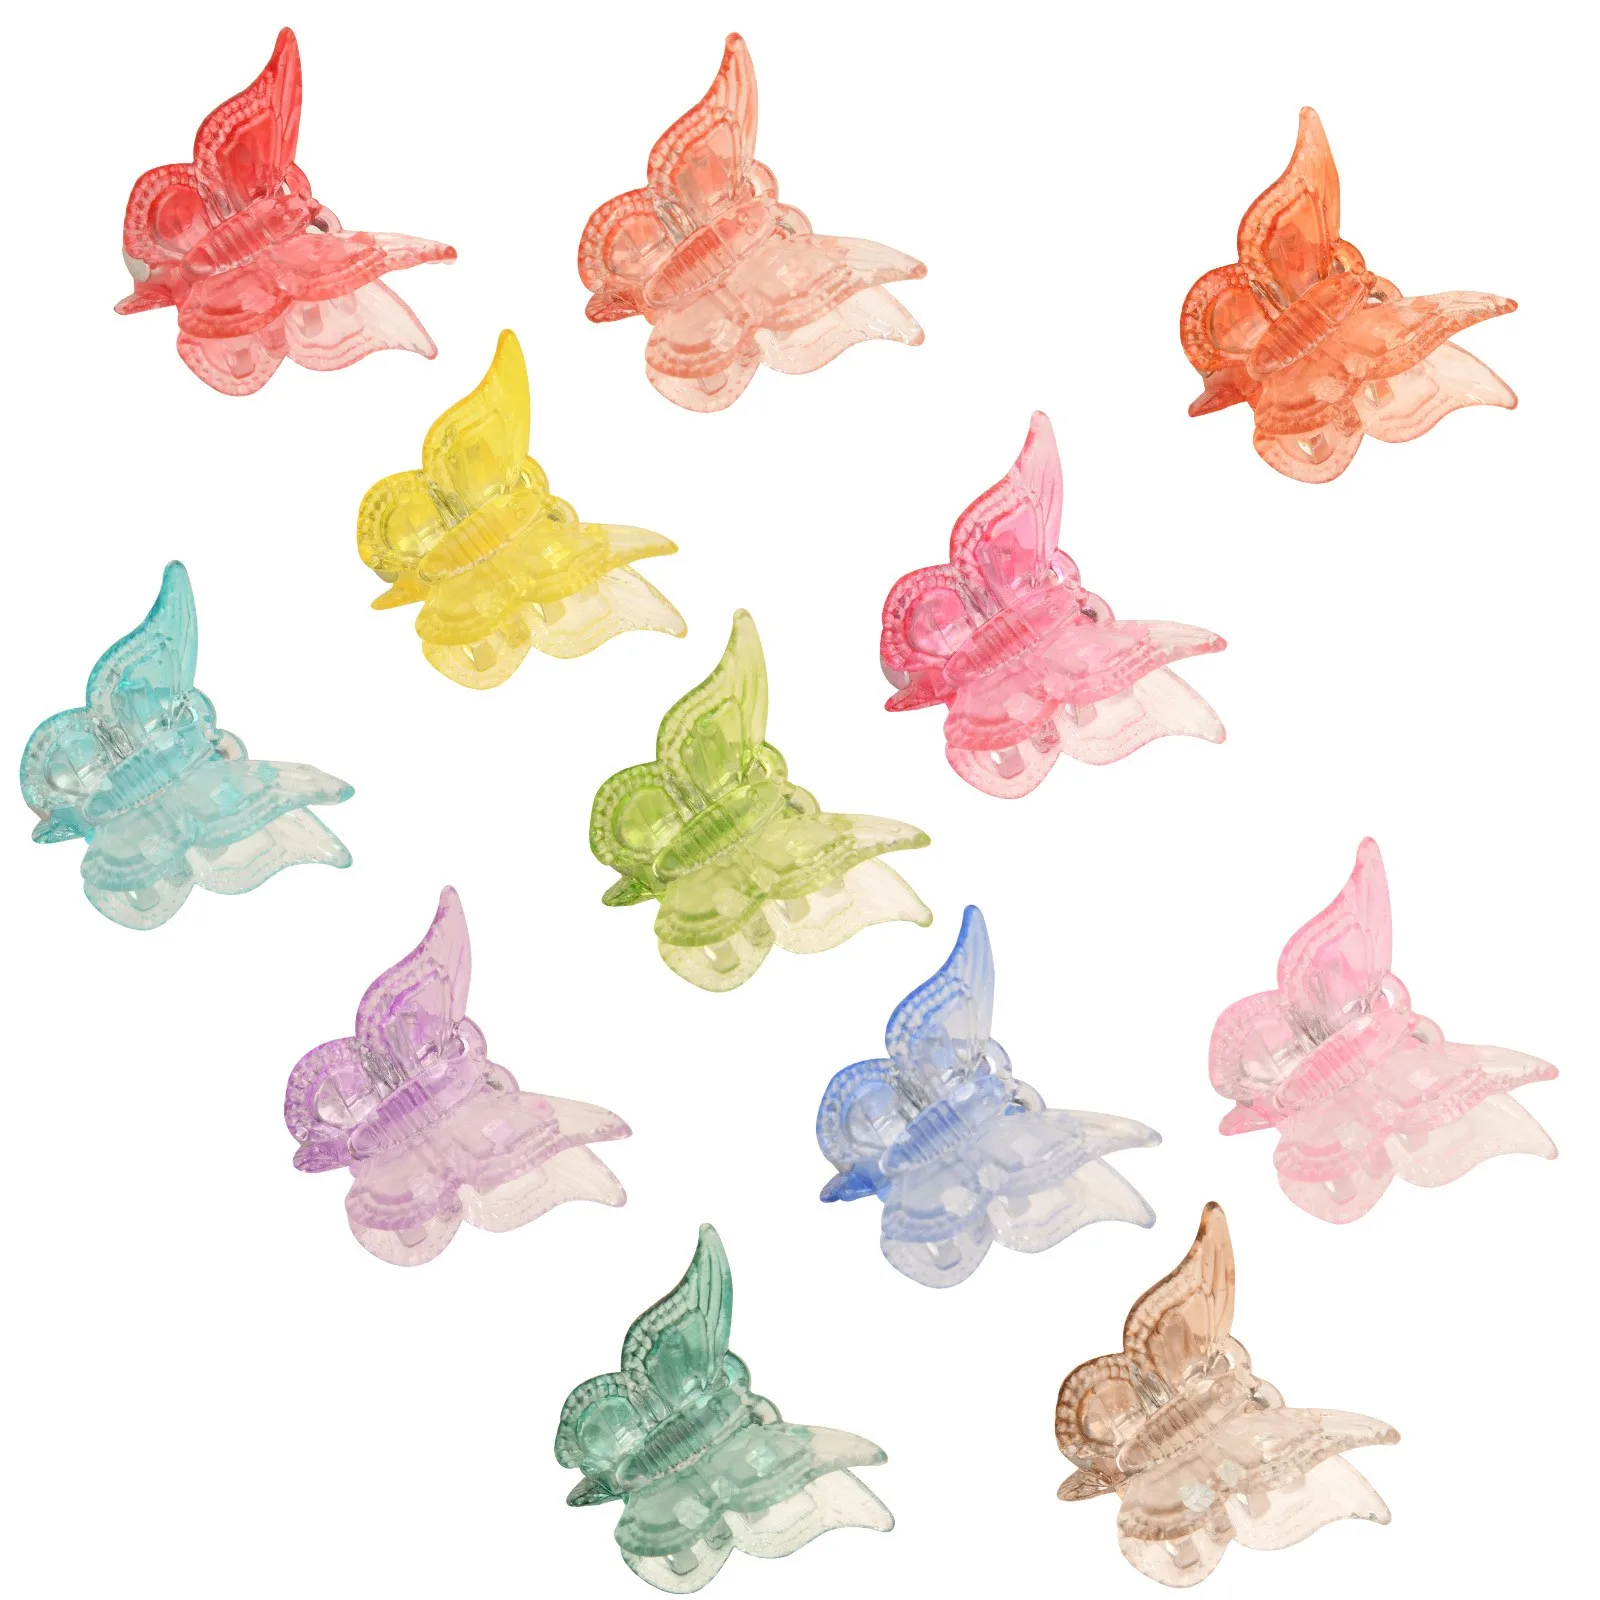 mini hair clips 12pcs/lot Mixed Color Butterfly Hair Clips Children's Small Clip Jelly Color Mini Hair Clips Beautiful Hair Clips Accessories head accessories female